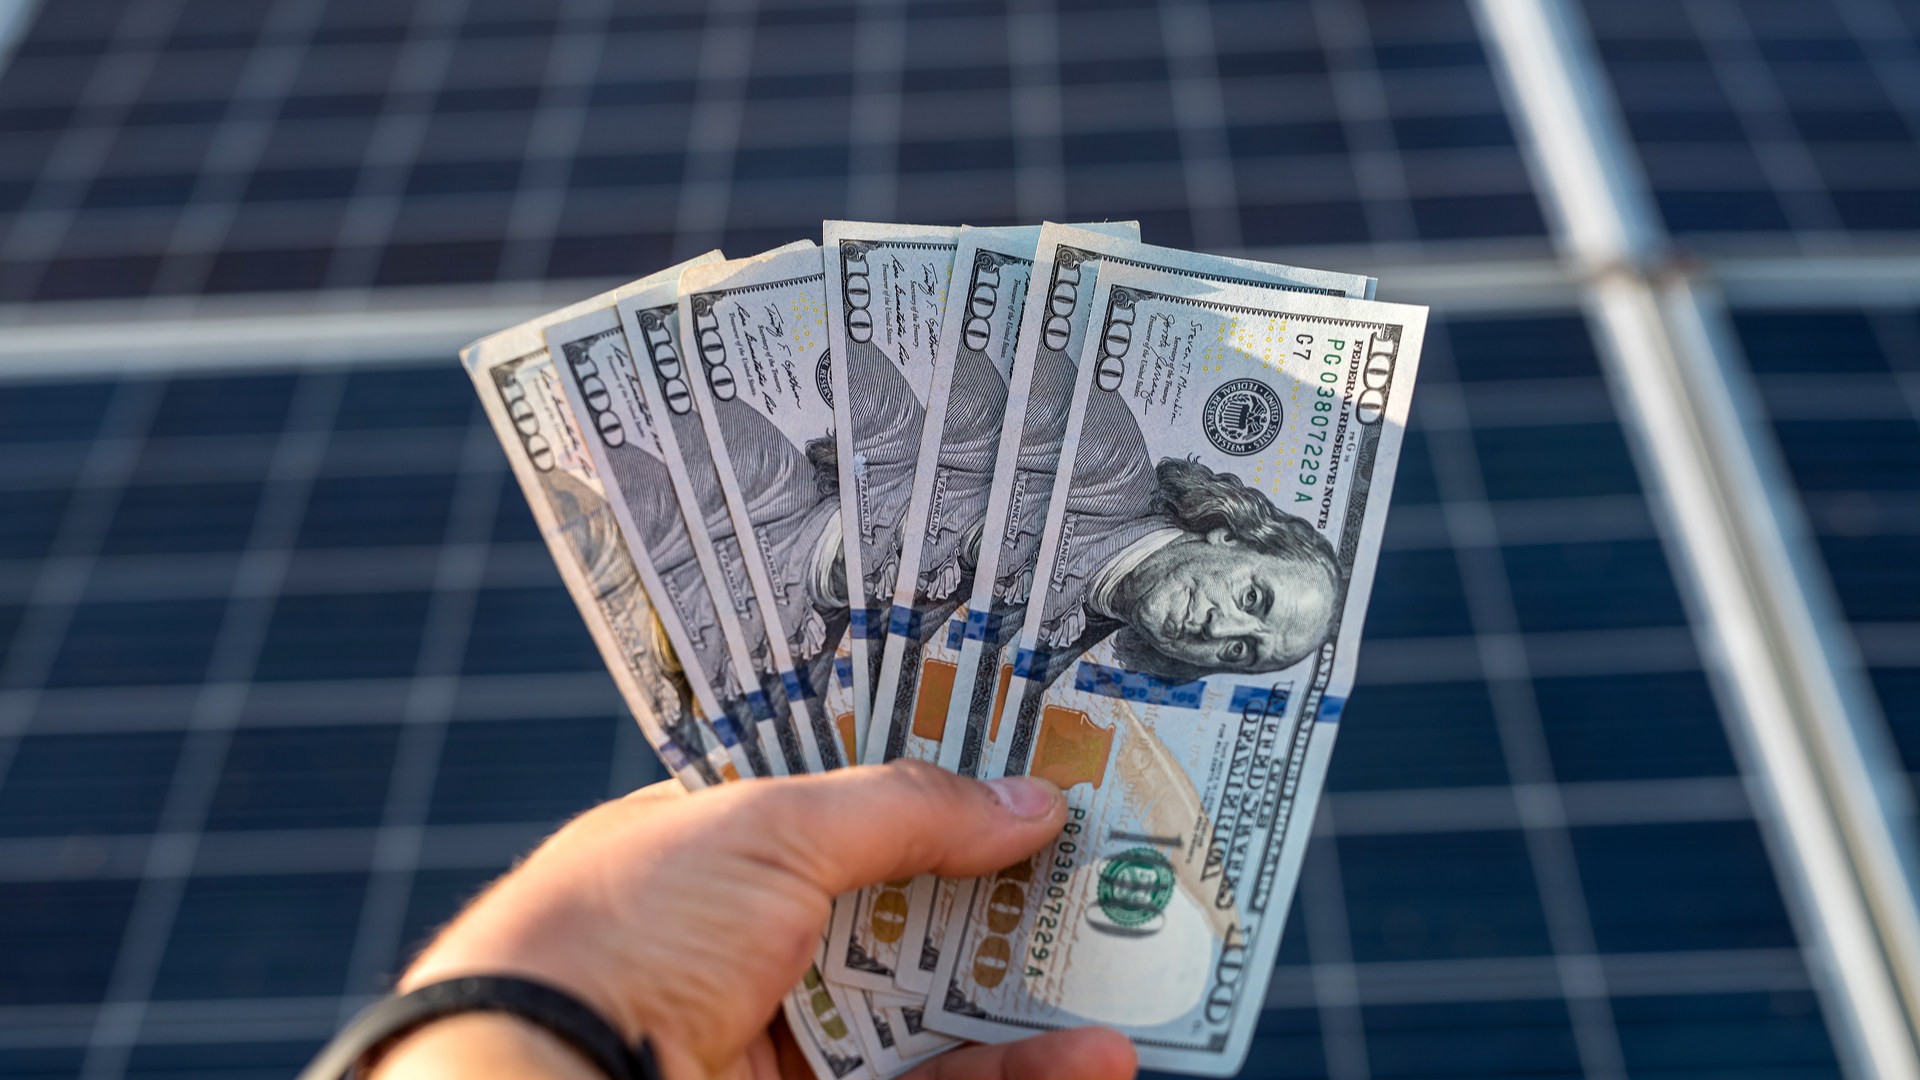 Solar panels and a pile of cash